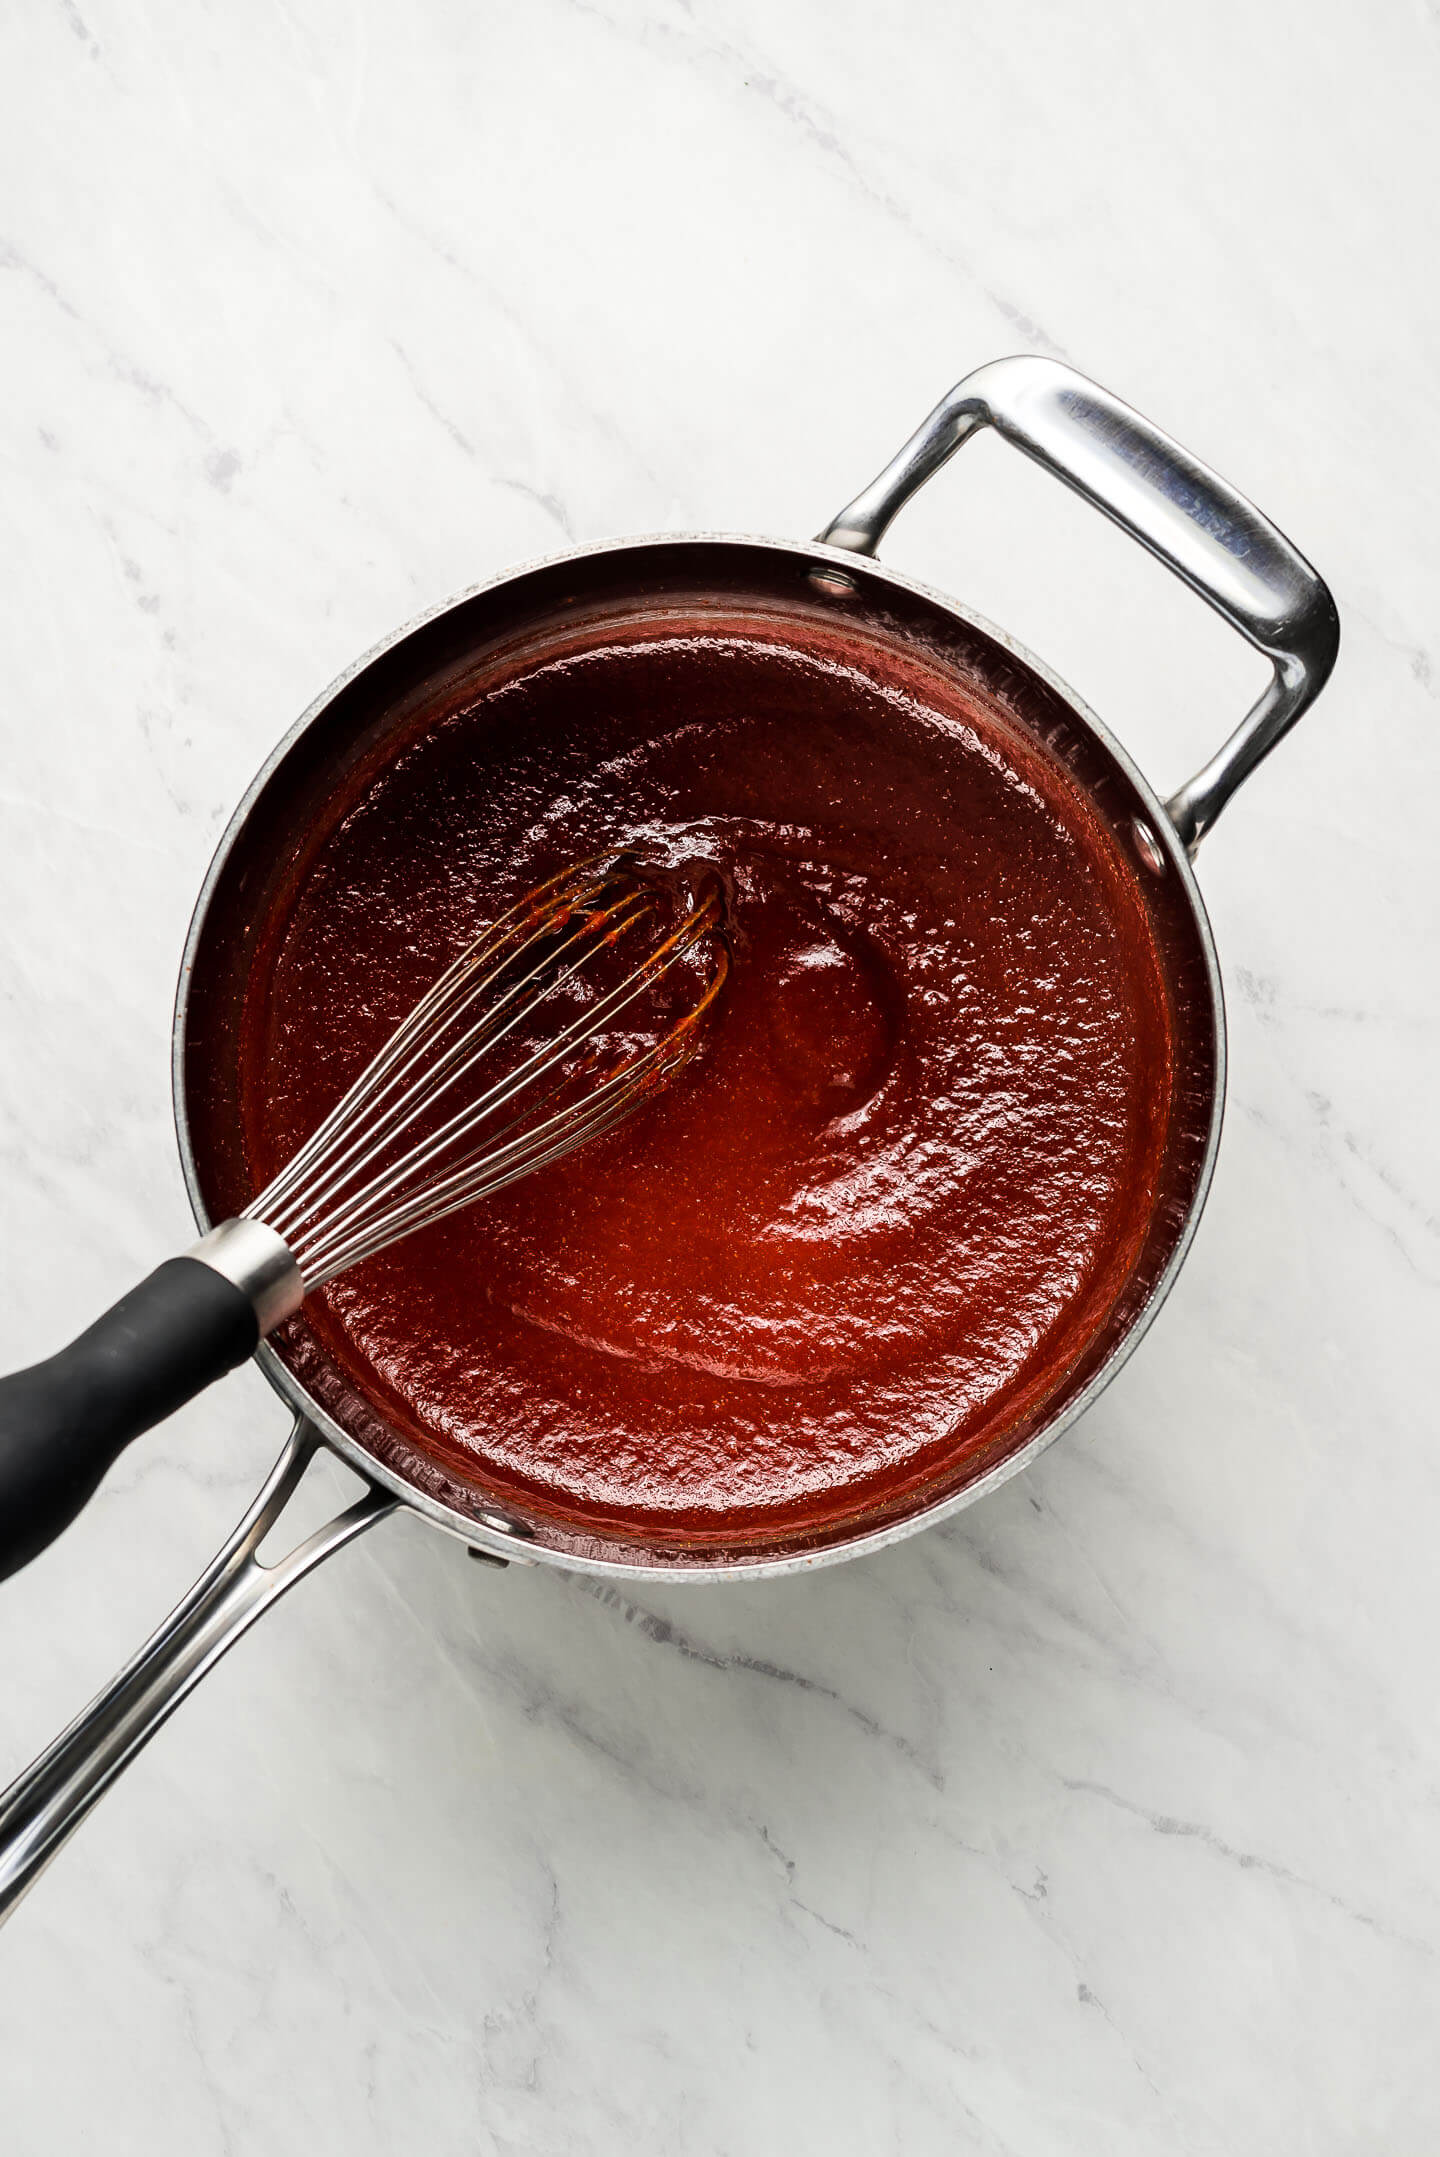 A pot of homemade barbecue sauce with a whisk.